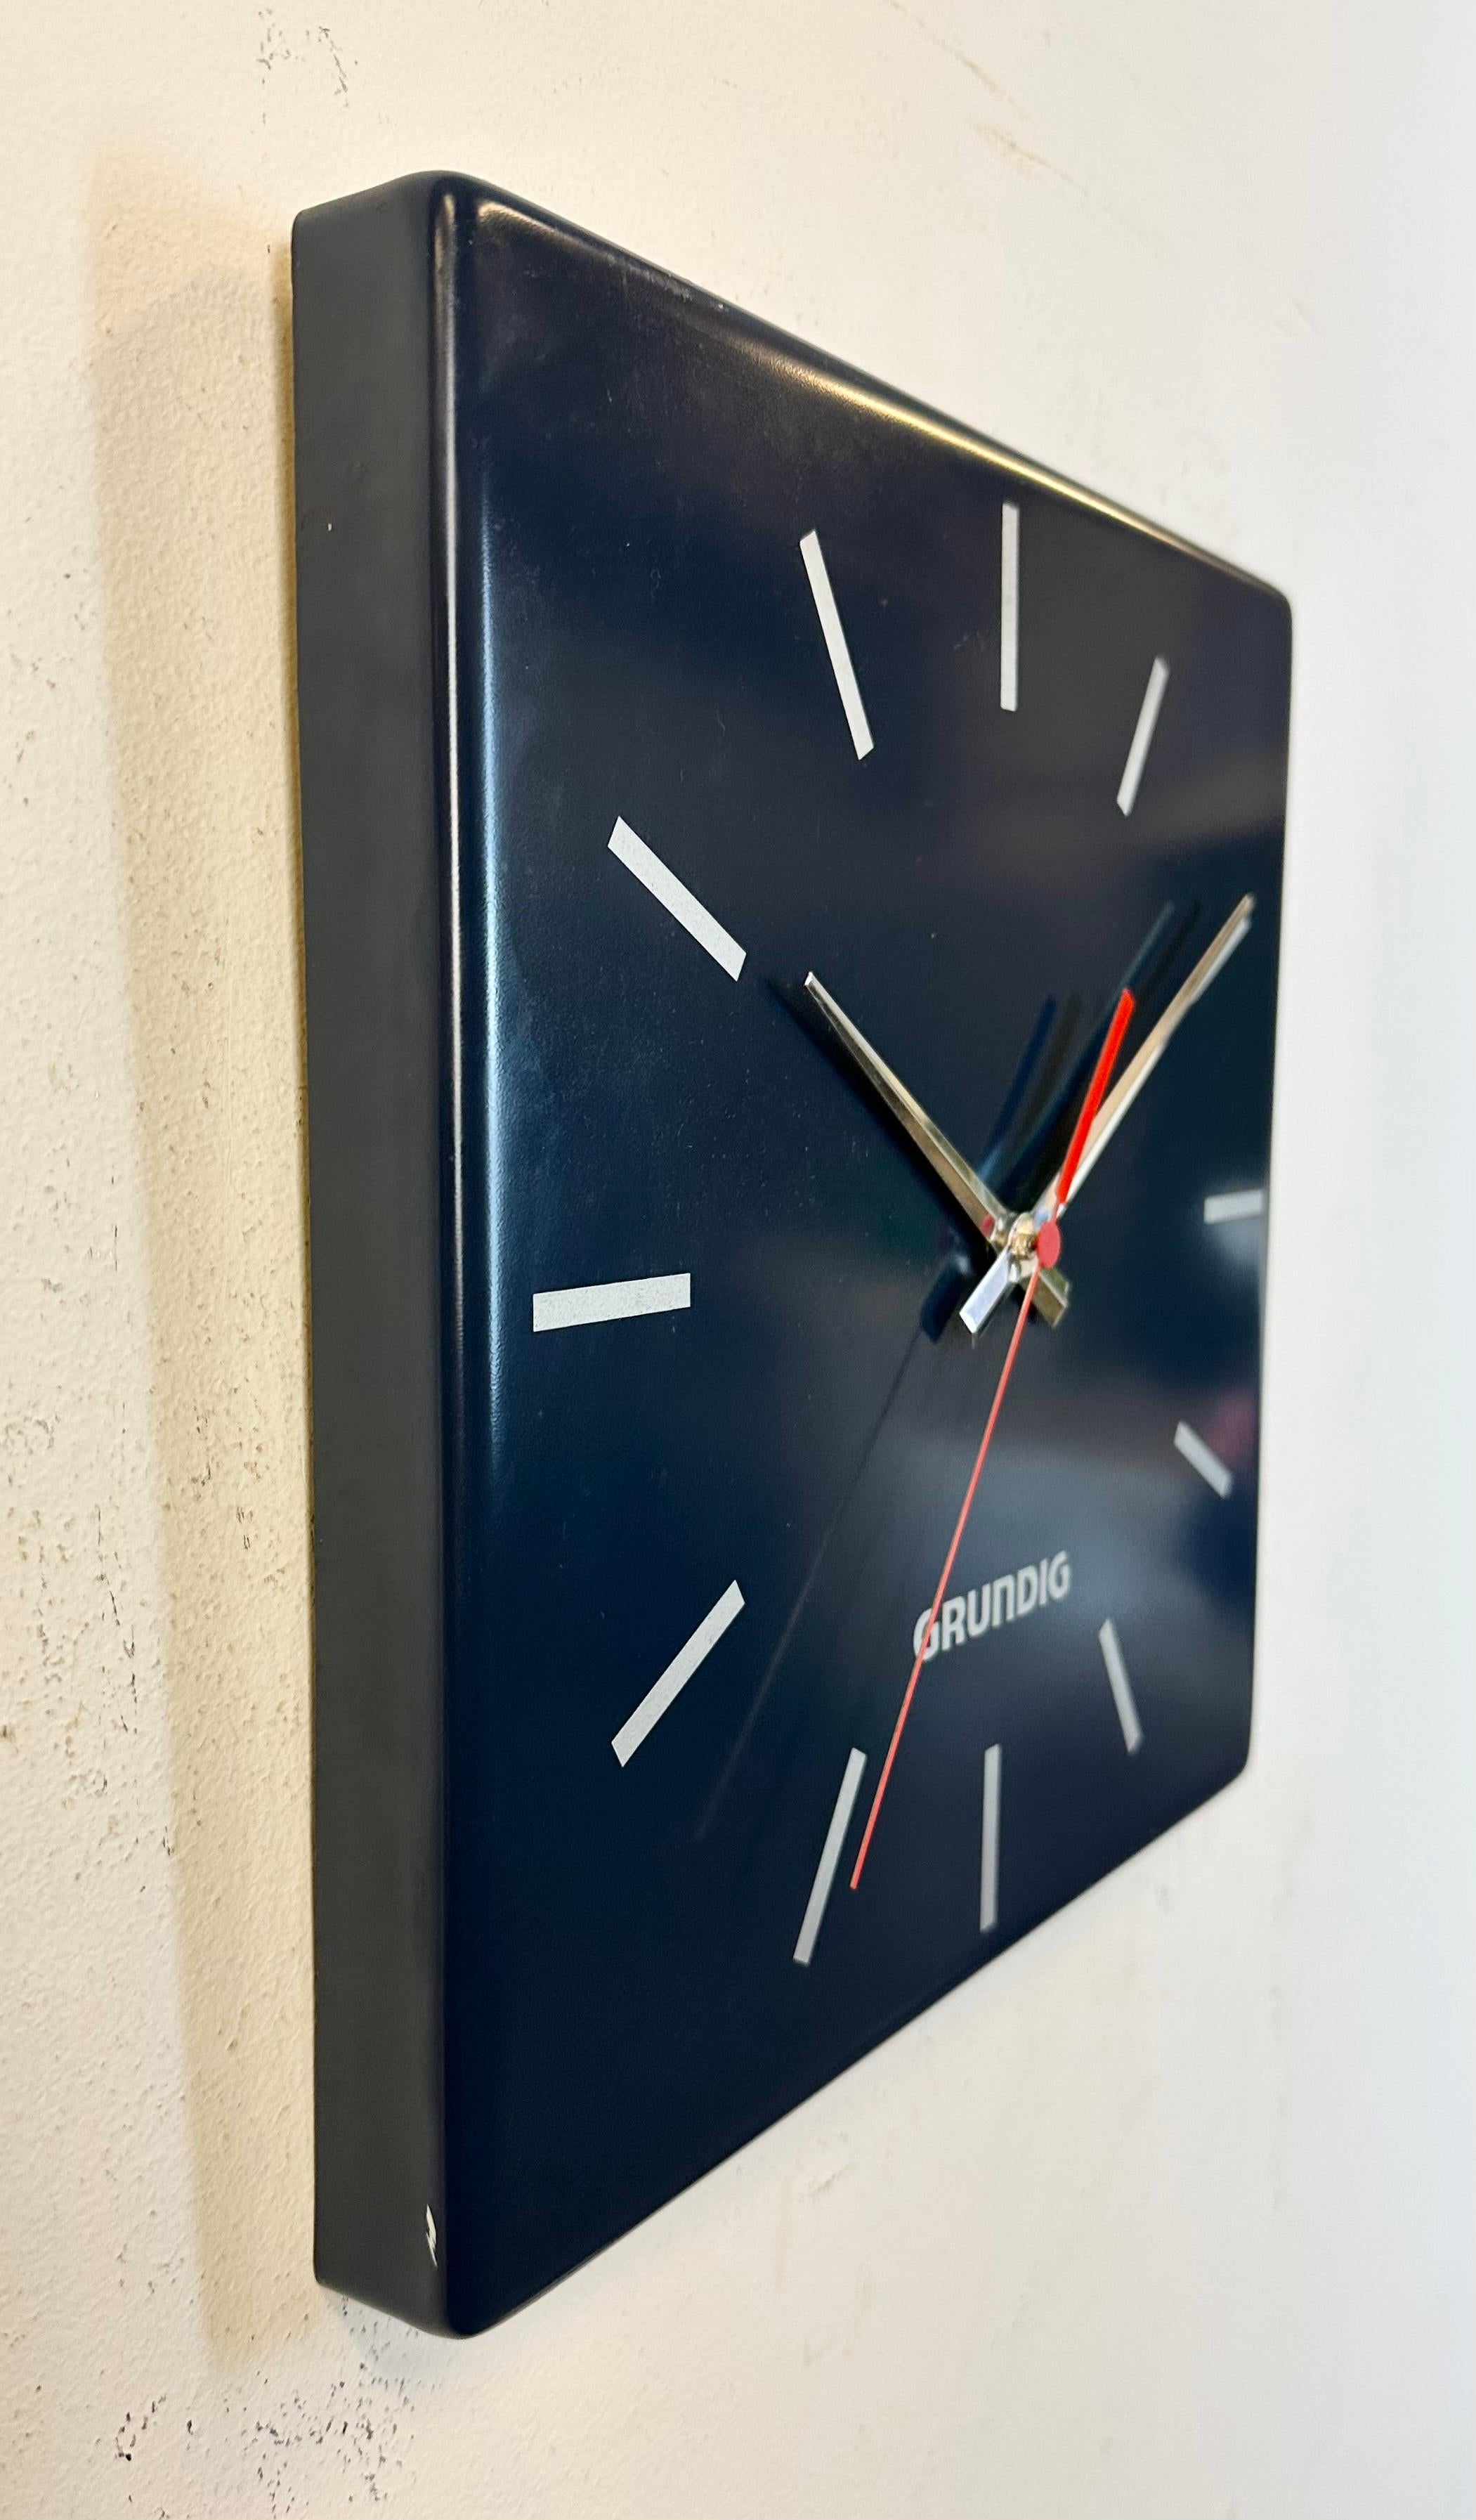 Vintage Blue Grundig Advertising Wall Clock, 1970s In Good Condition For Sale In Kojetice, CZ